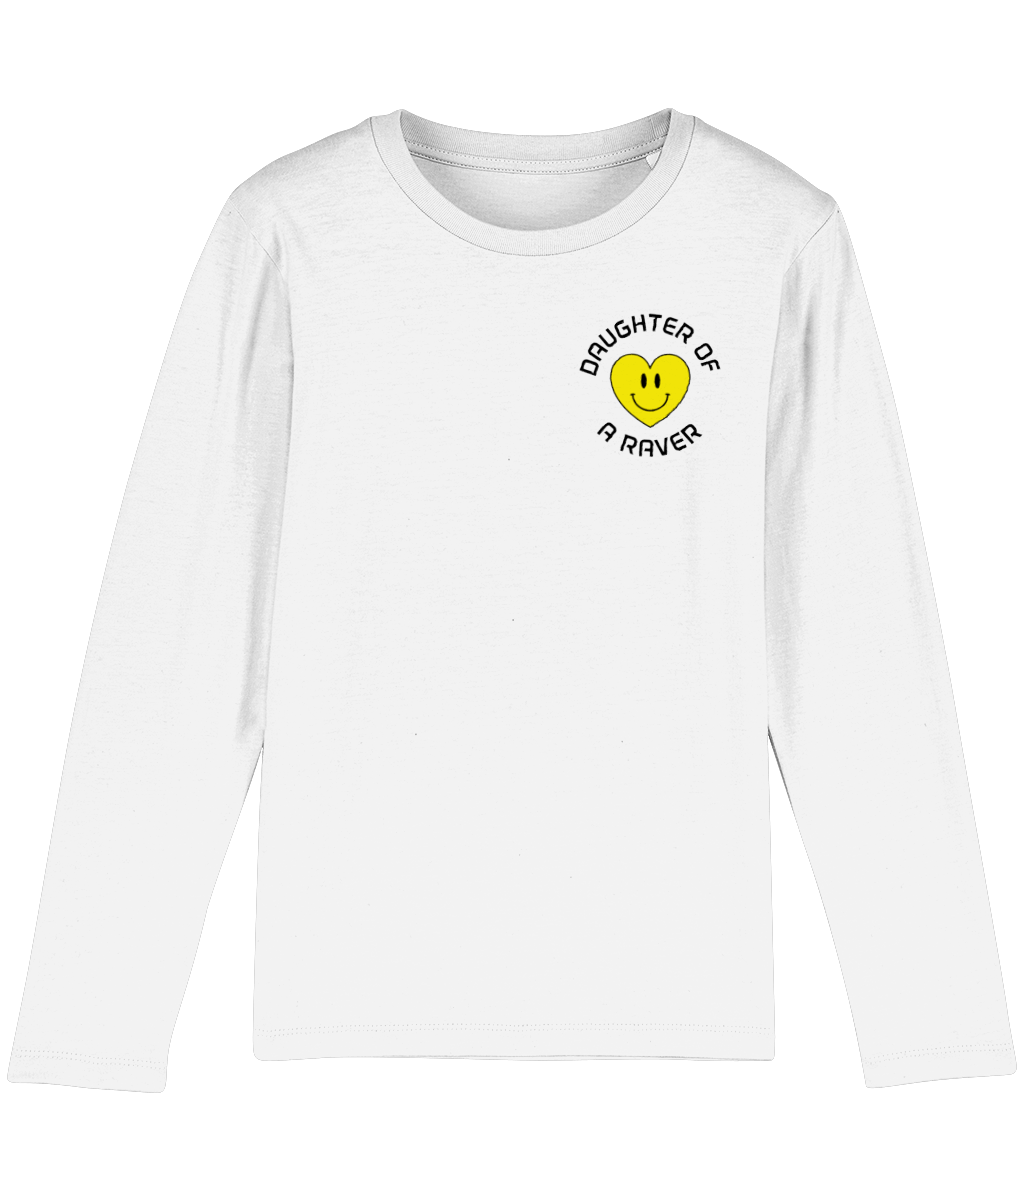 Also Printed on the Back! Long Sleeve T Shirt, 100% Organic Soft Cotton, Daughter of A Raver :)